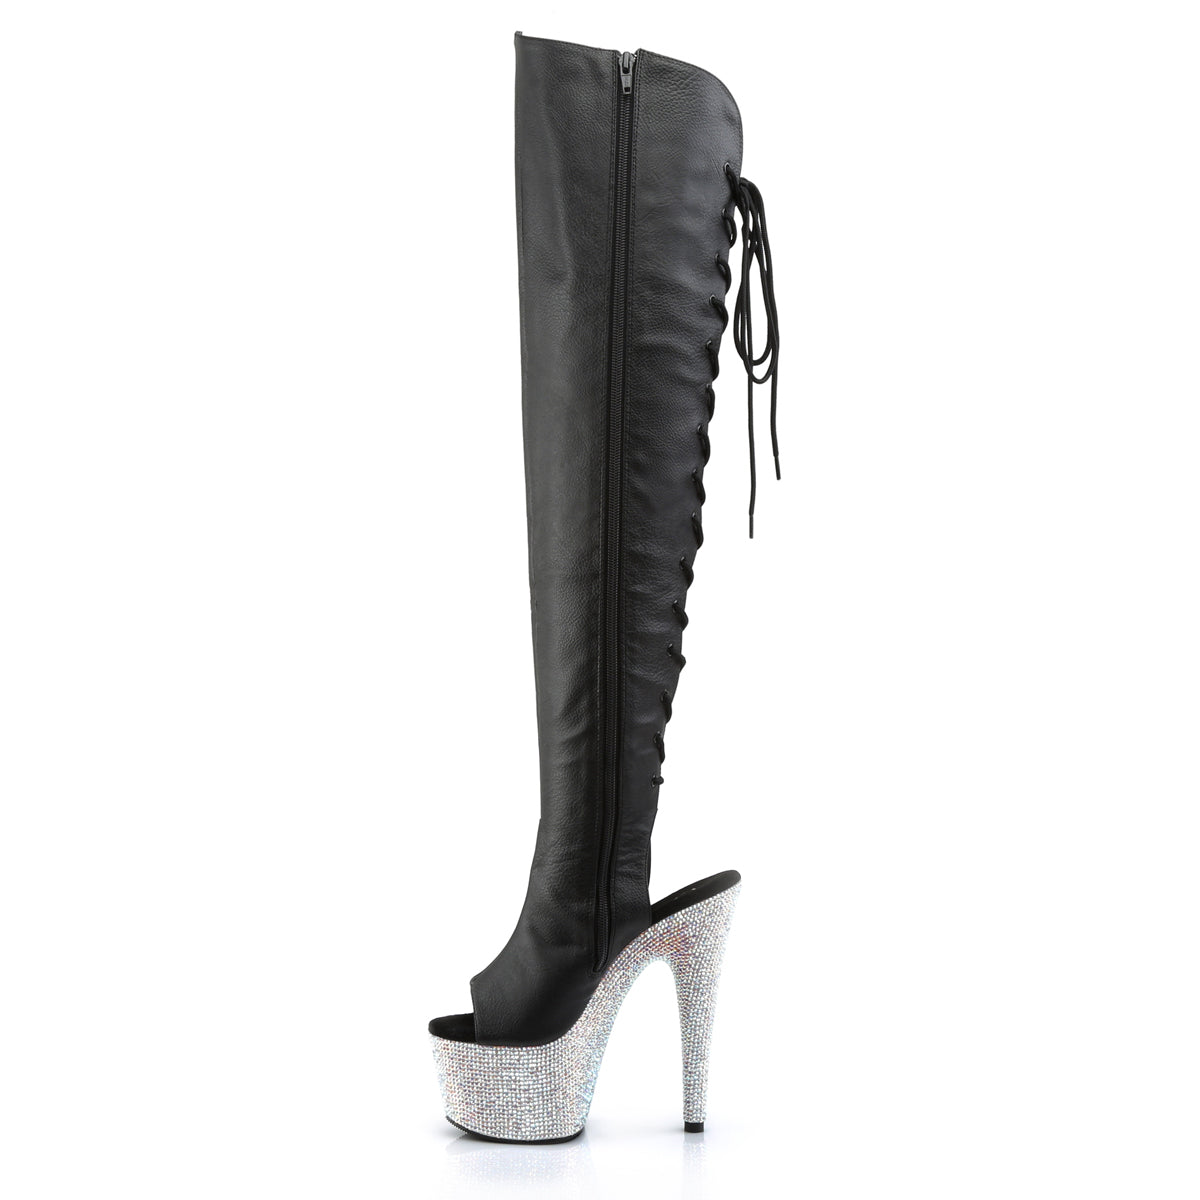 BEJEWELED-3019DM-7 Silver & Black Thigh High Peep Toe Boots